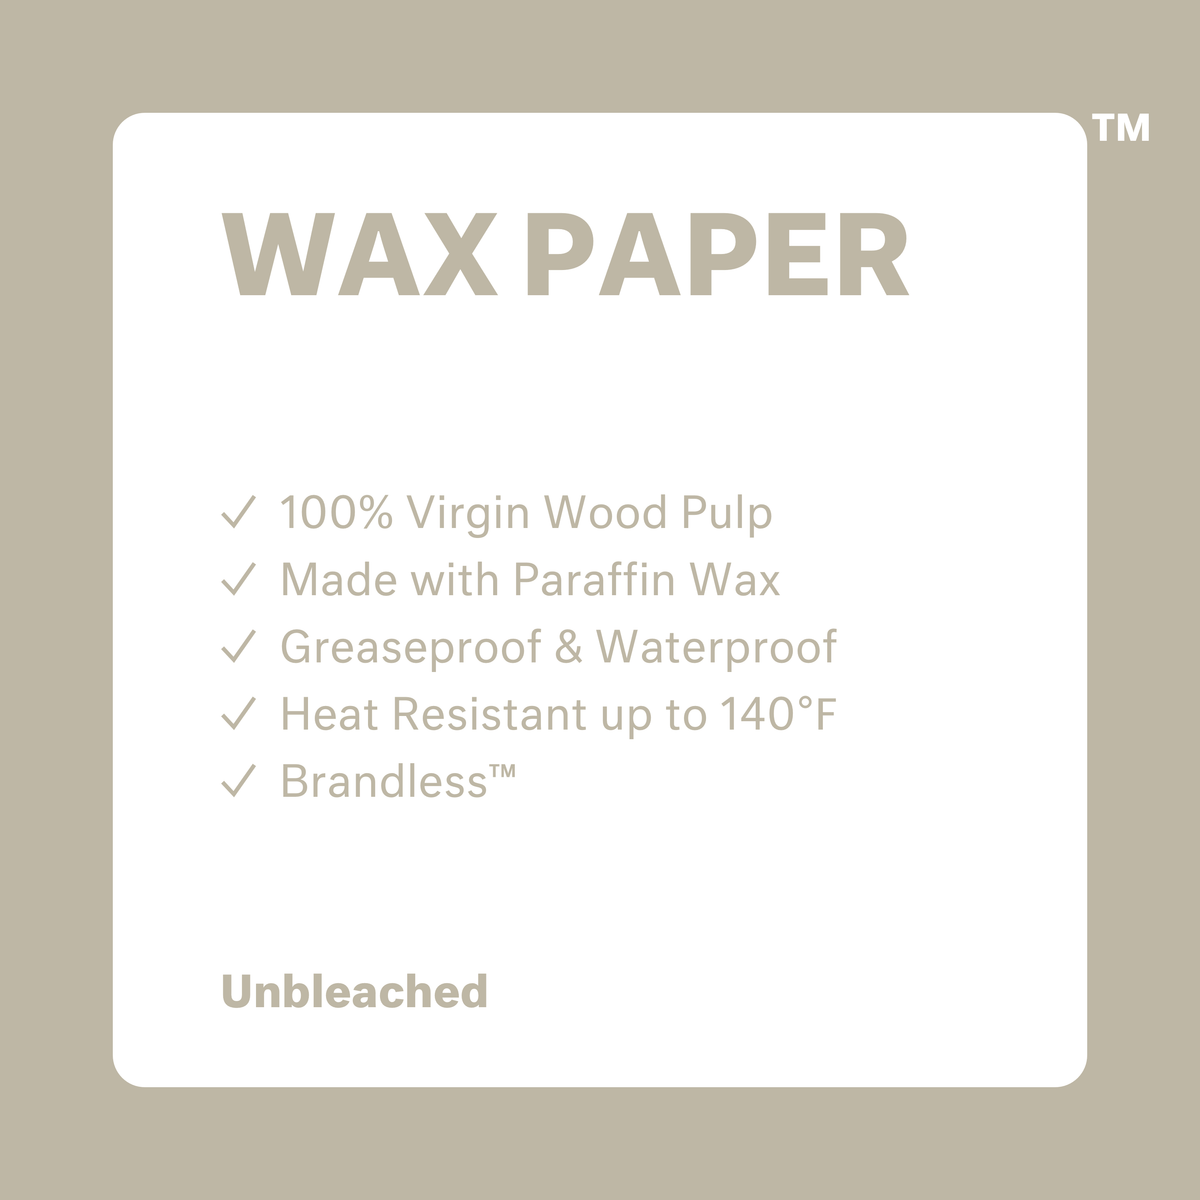 Wax paper: 100% virgin wood pulp, made with parafin wax, greaseproof and waterproof, heat resistant up to 140 degrees farenheit, brandless.  Unbleached.